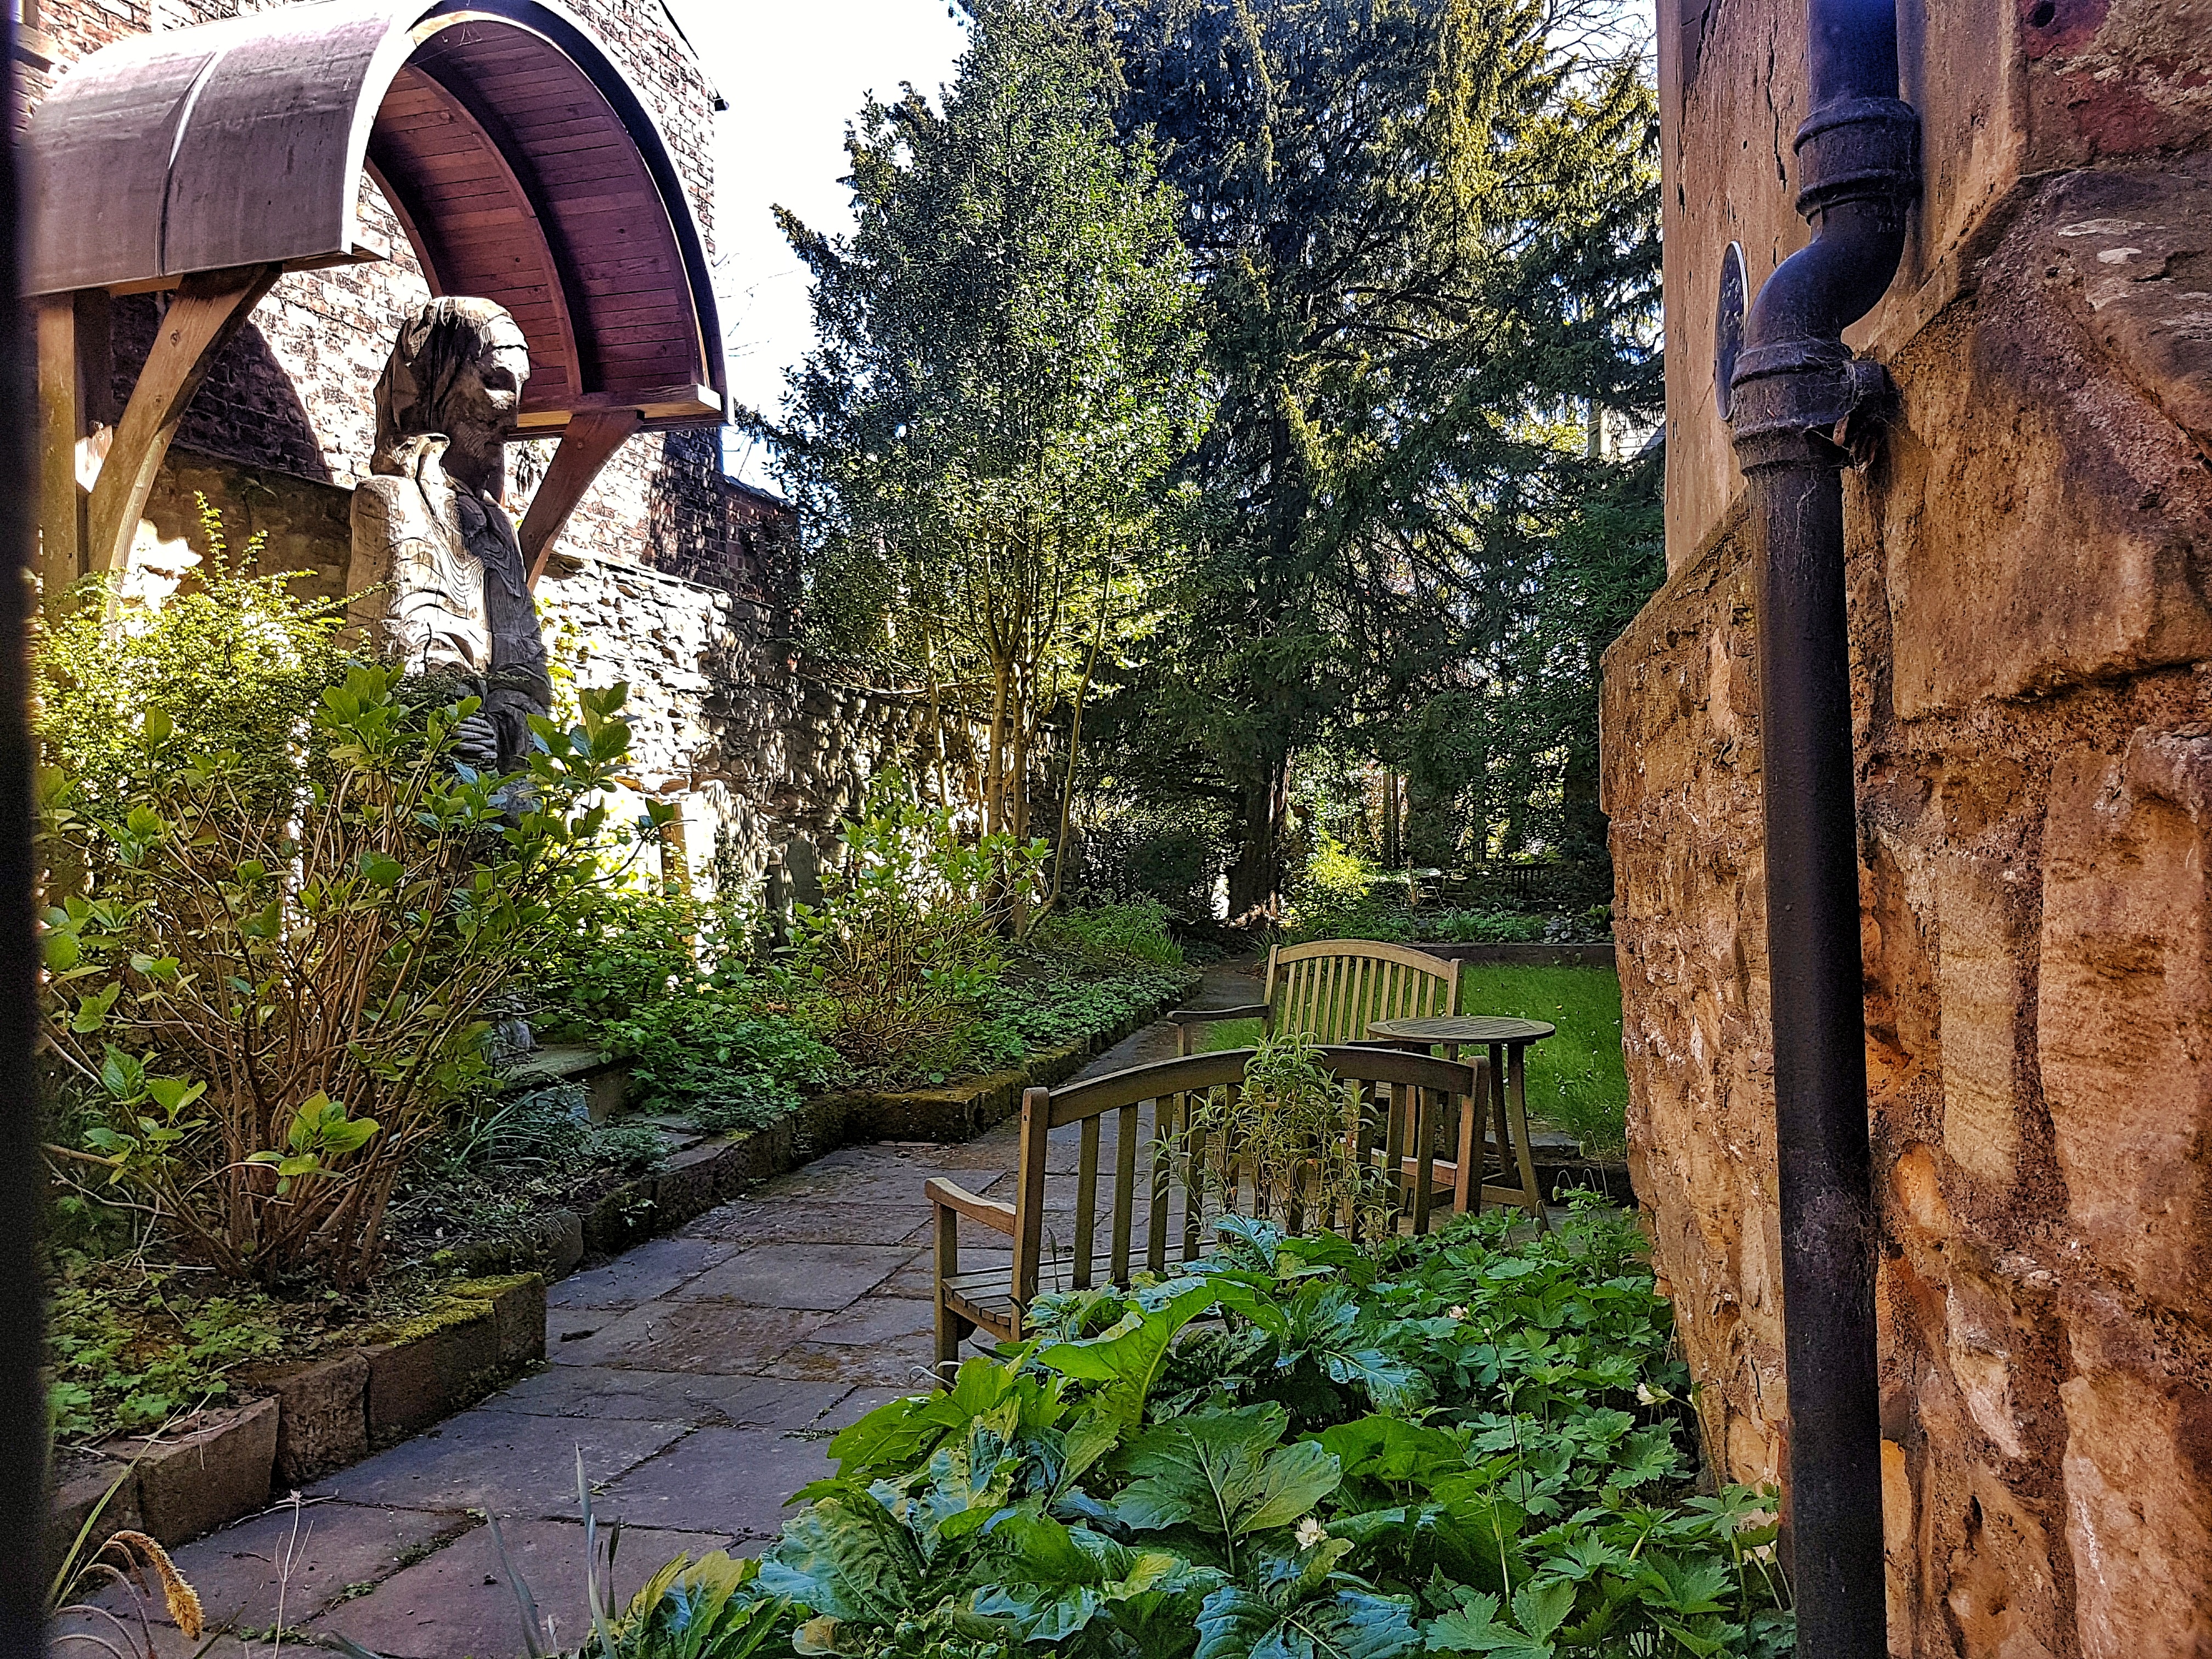 Durham secret garden - Your virtual guide to exploring the city of Durham UK . Come have a look! >>www.whatsupcourtney.com